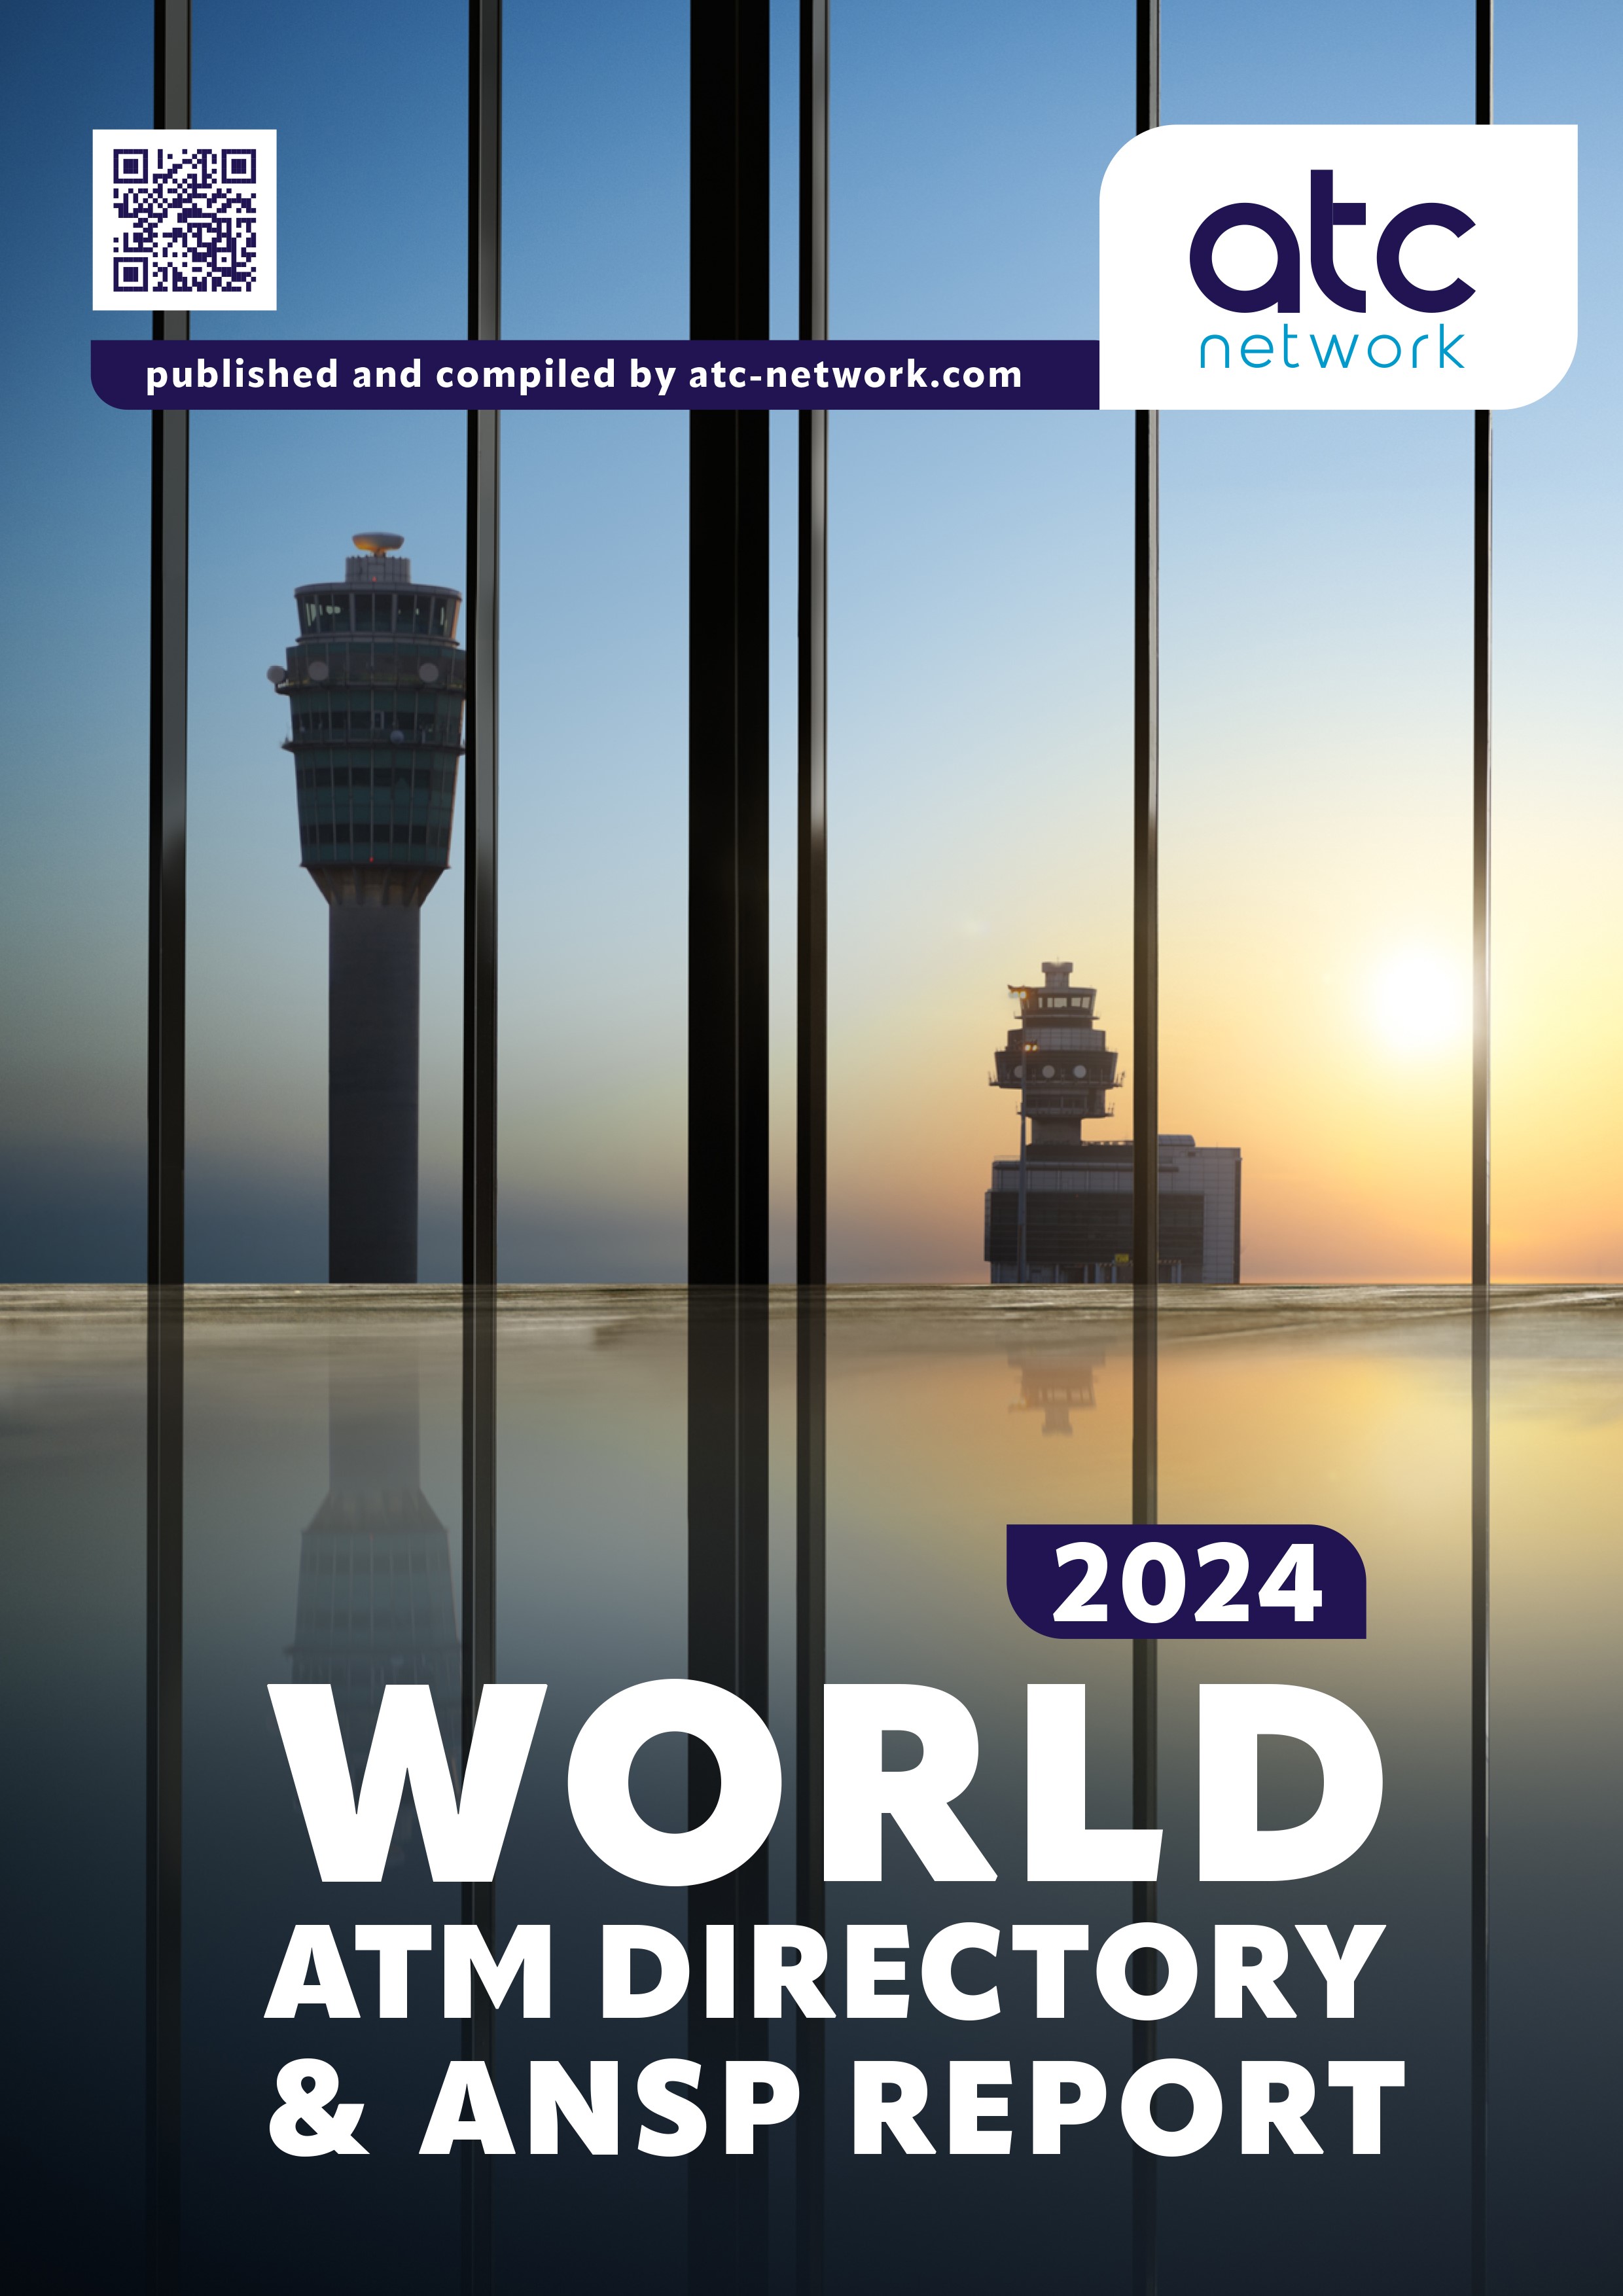 World ATM Directory & ANSP Report 2024